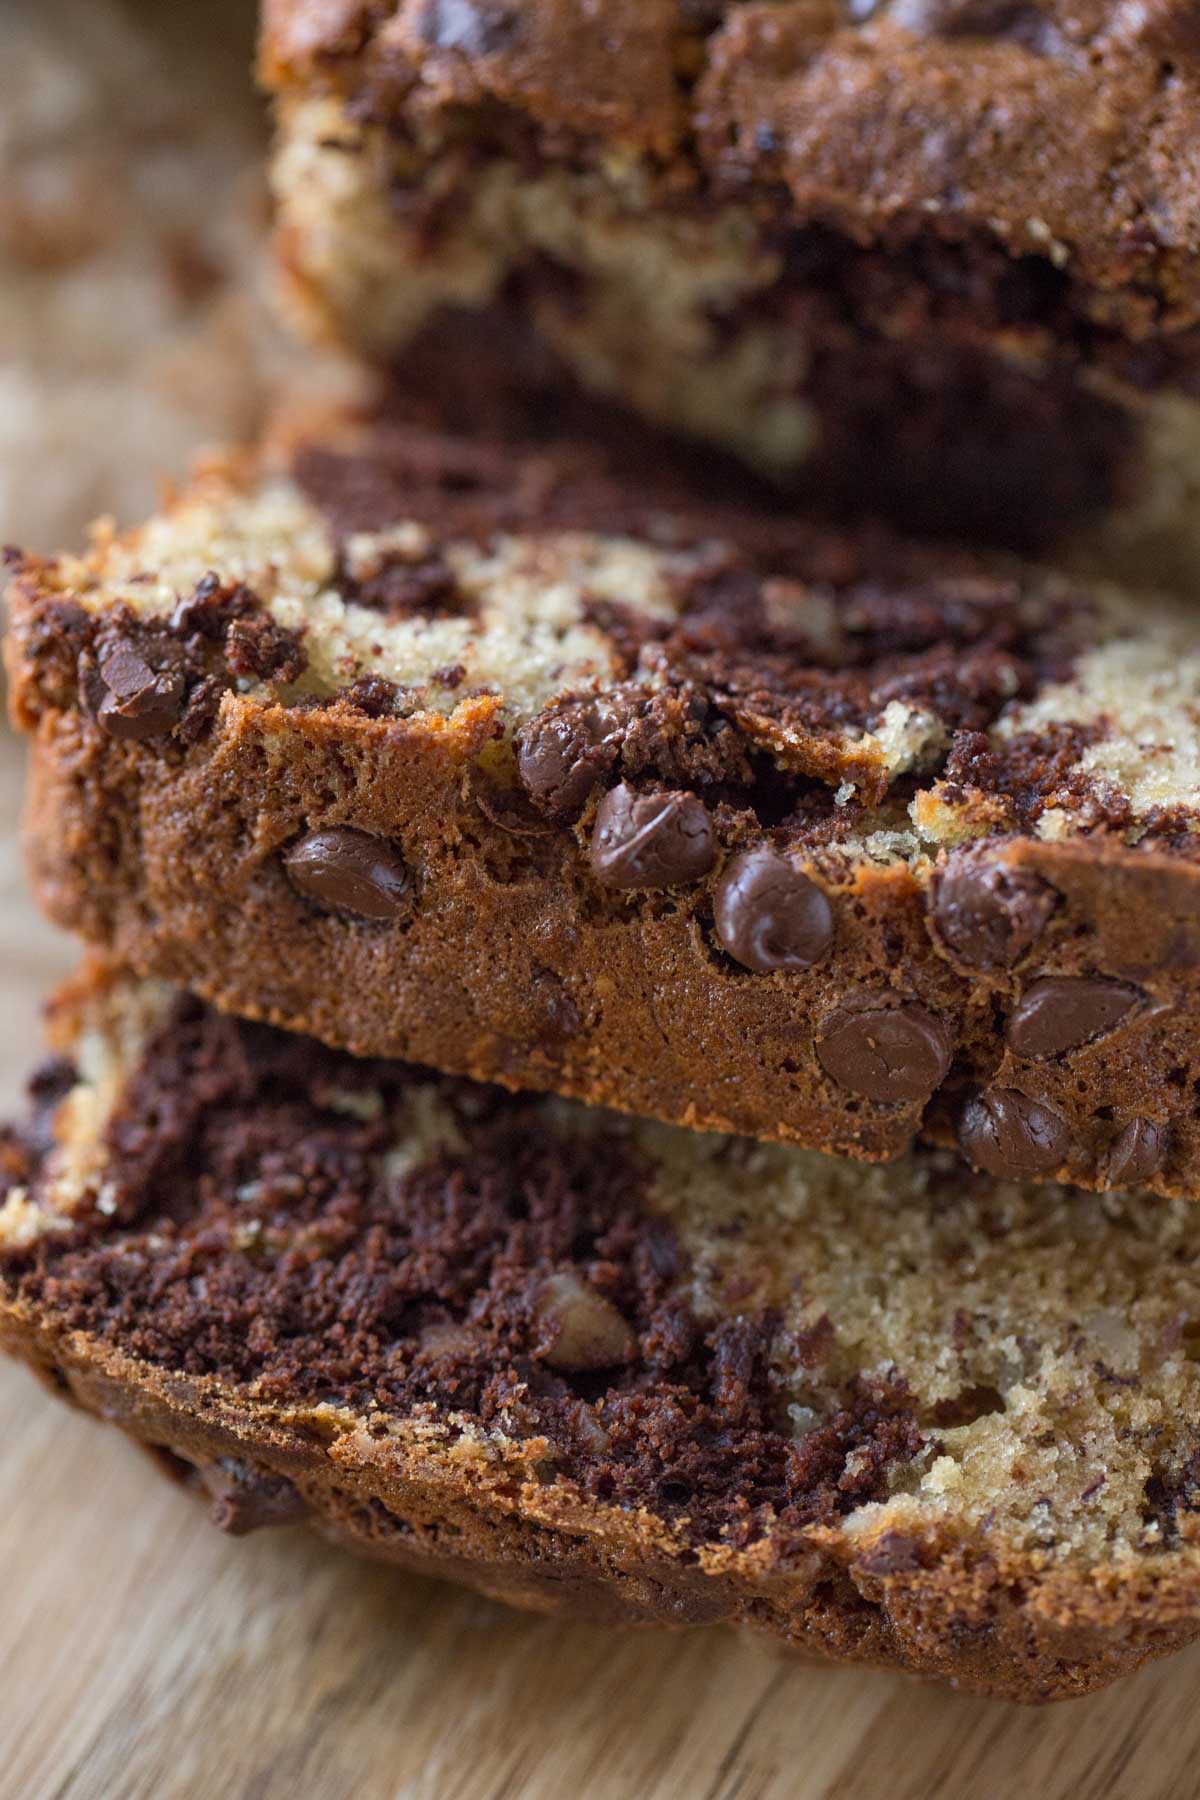 Slices of Marbled Chocolate Banana Bread.  